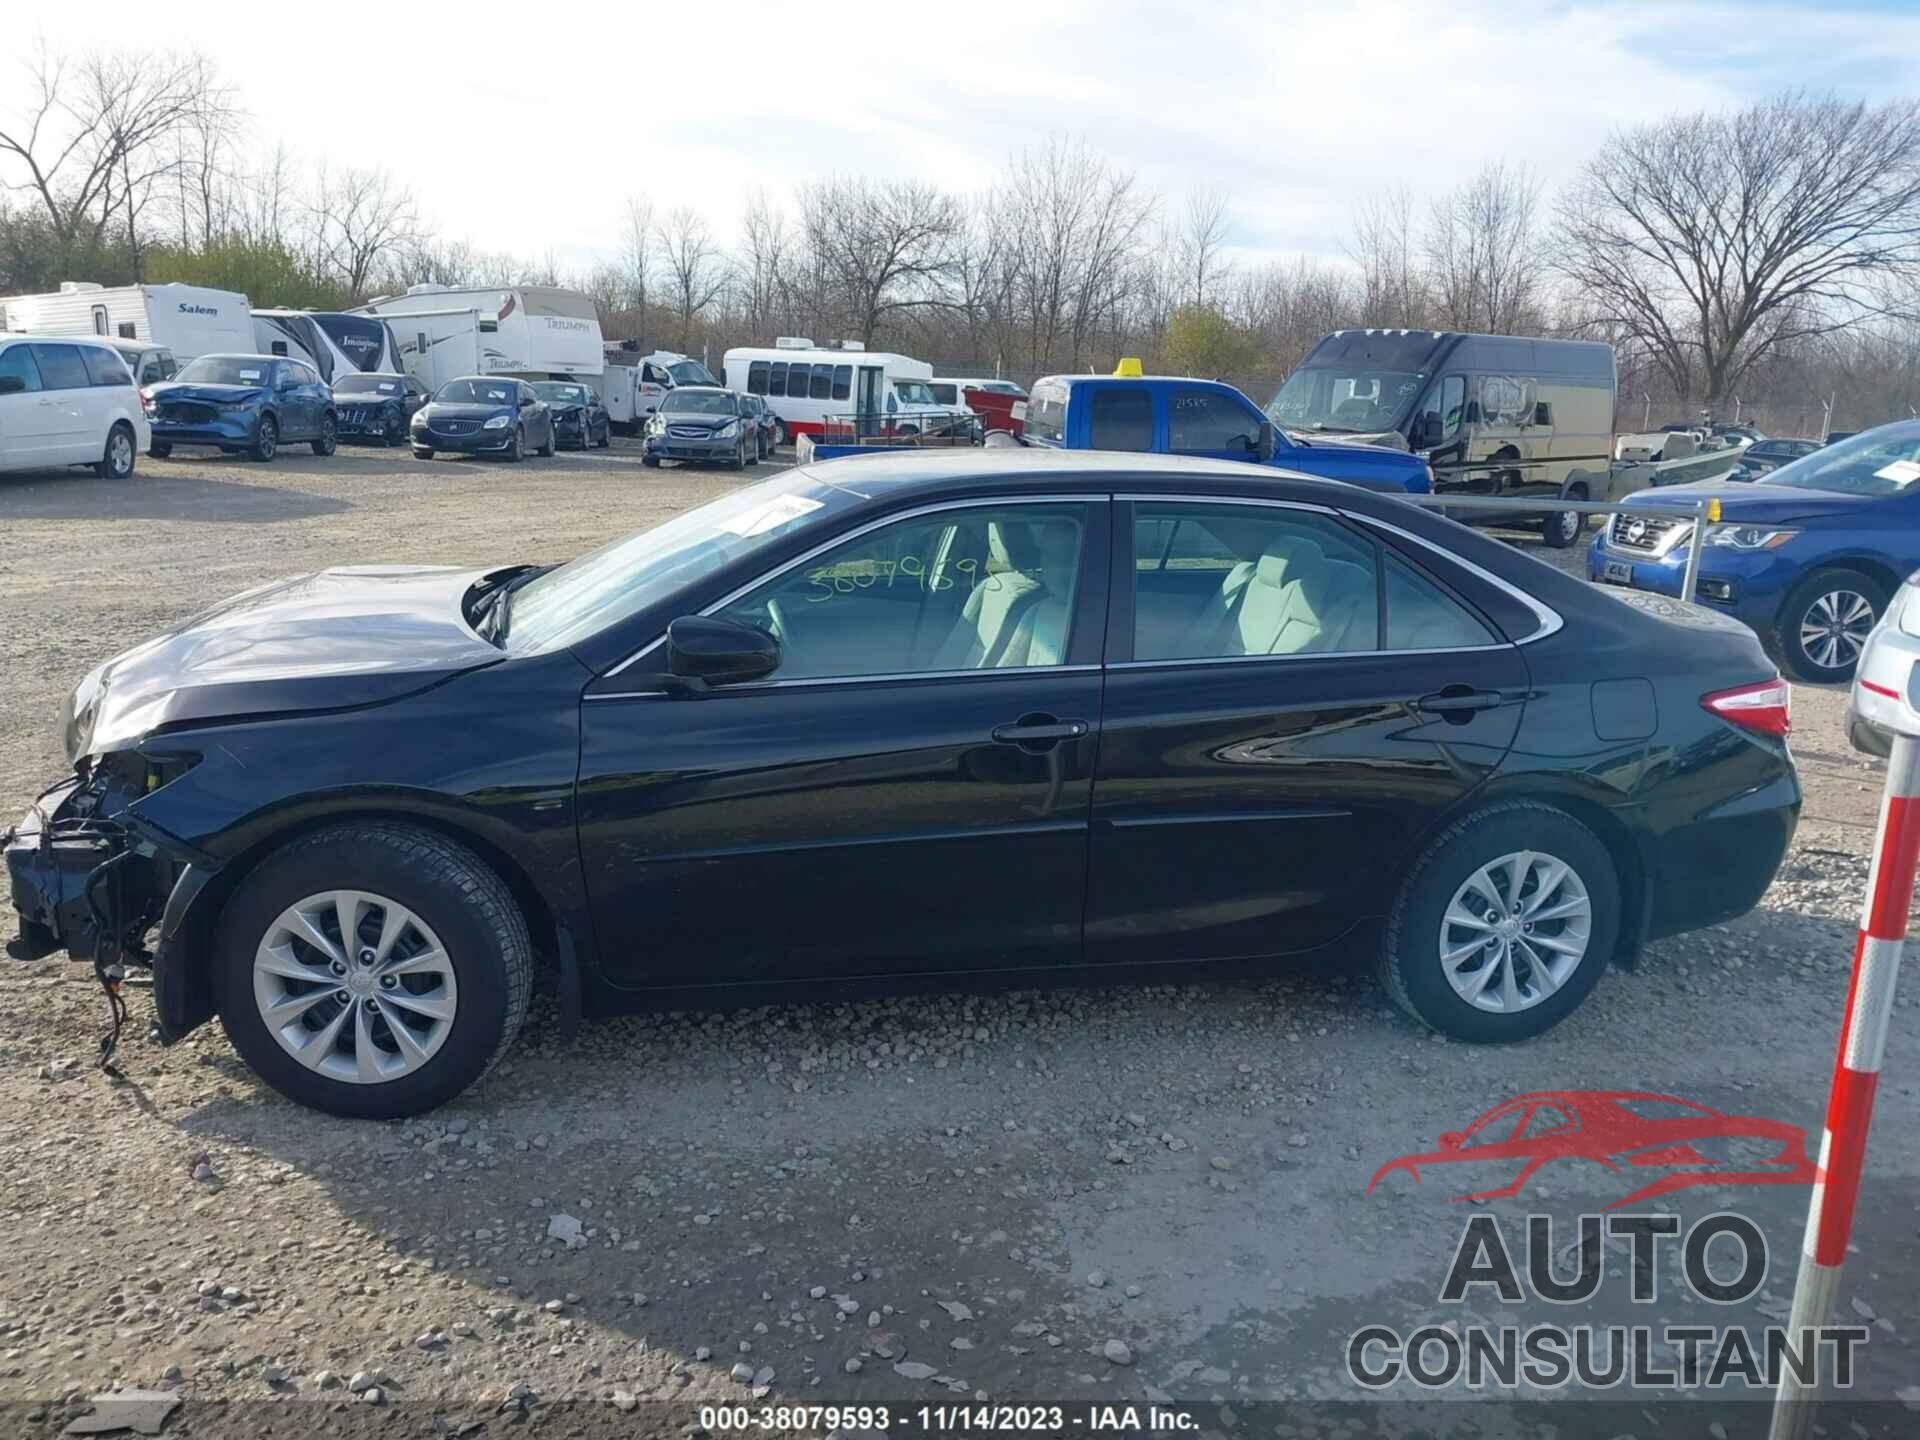 TOYOTA CAMRY 2016 - 4T4BF1FK5GR522620